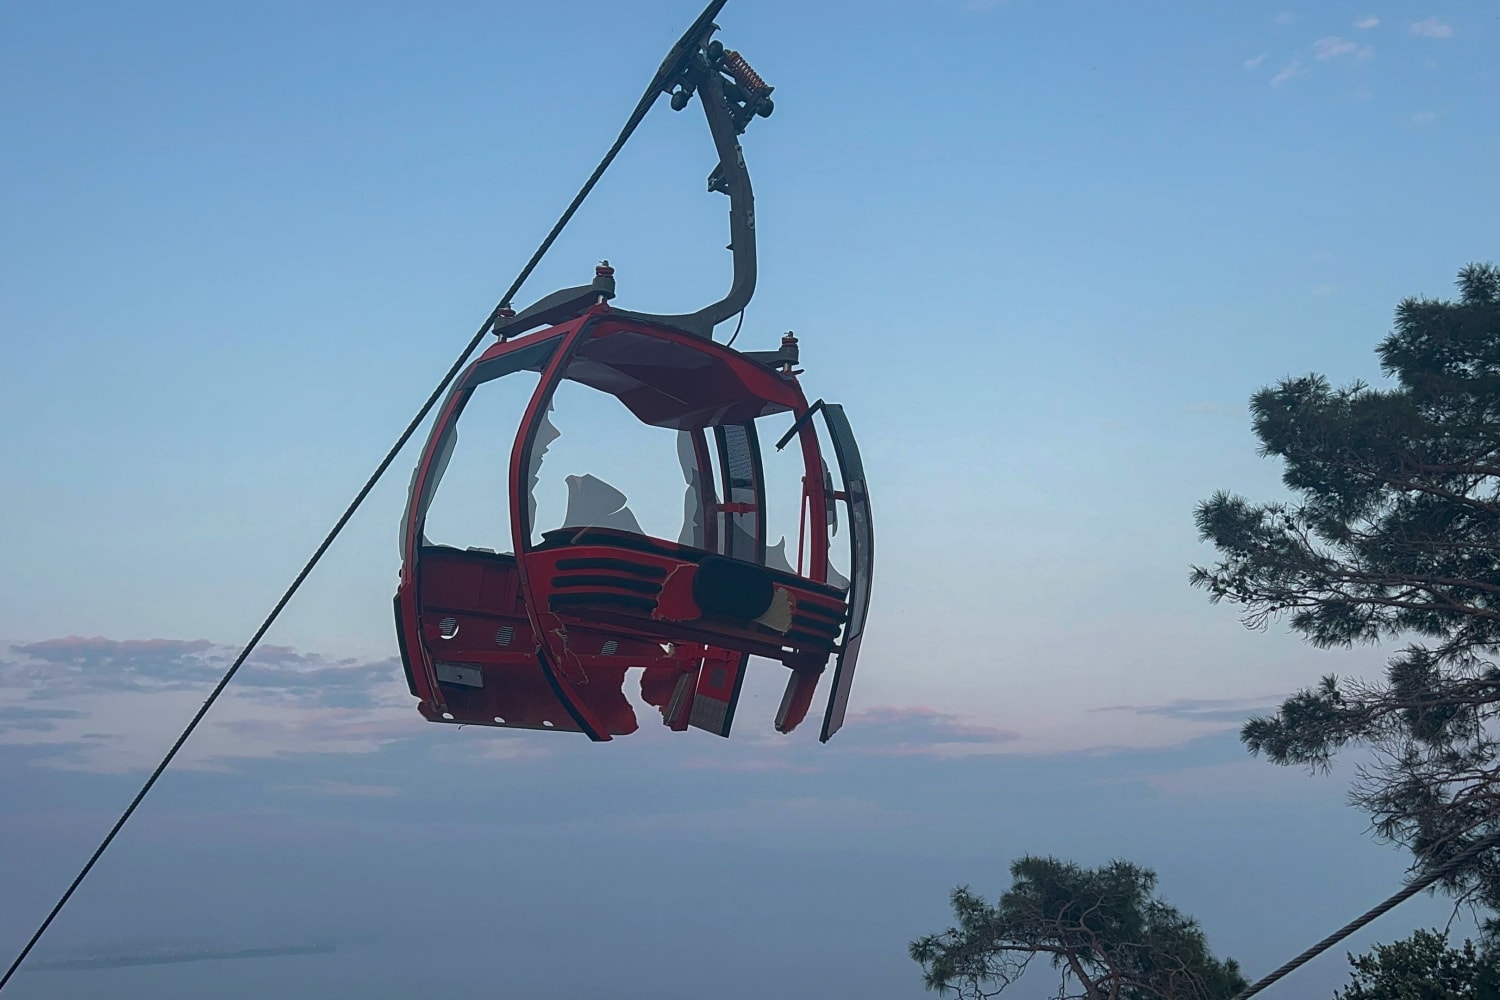 More than 40 people are stranded after a deadly cable car accident in Türkiye